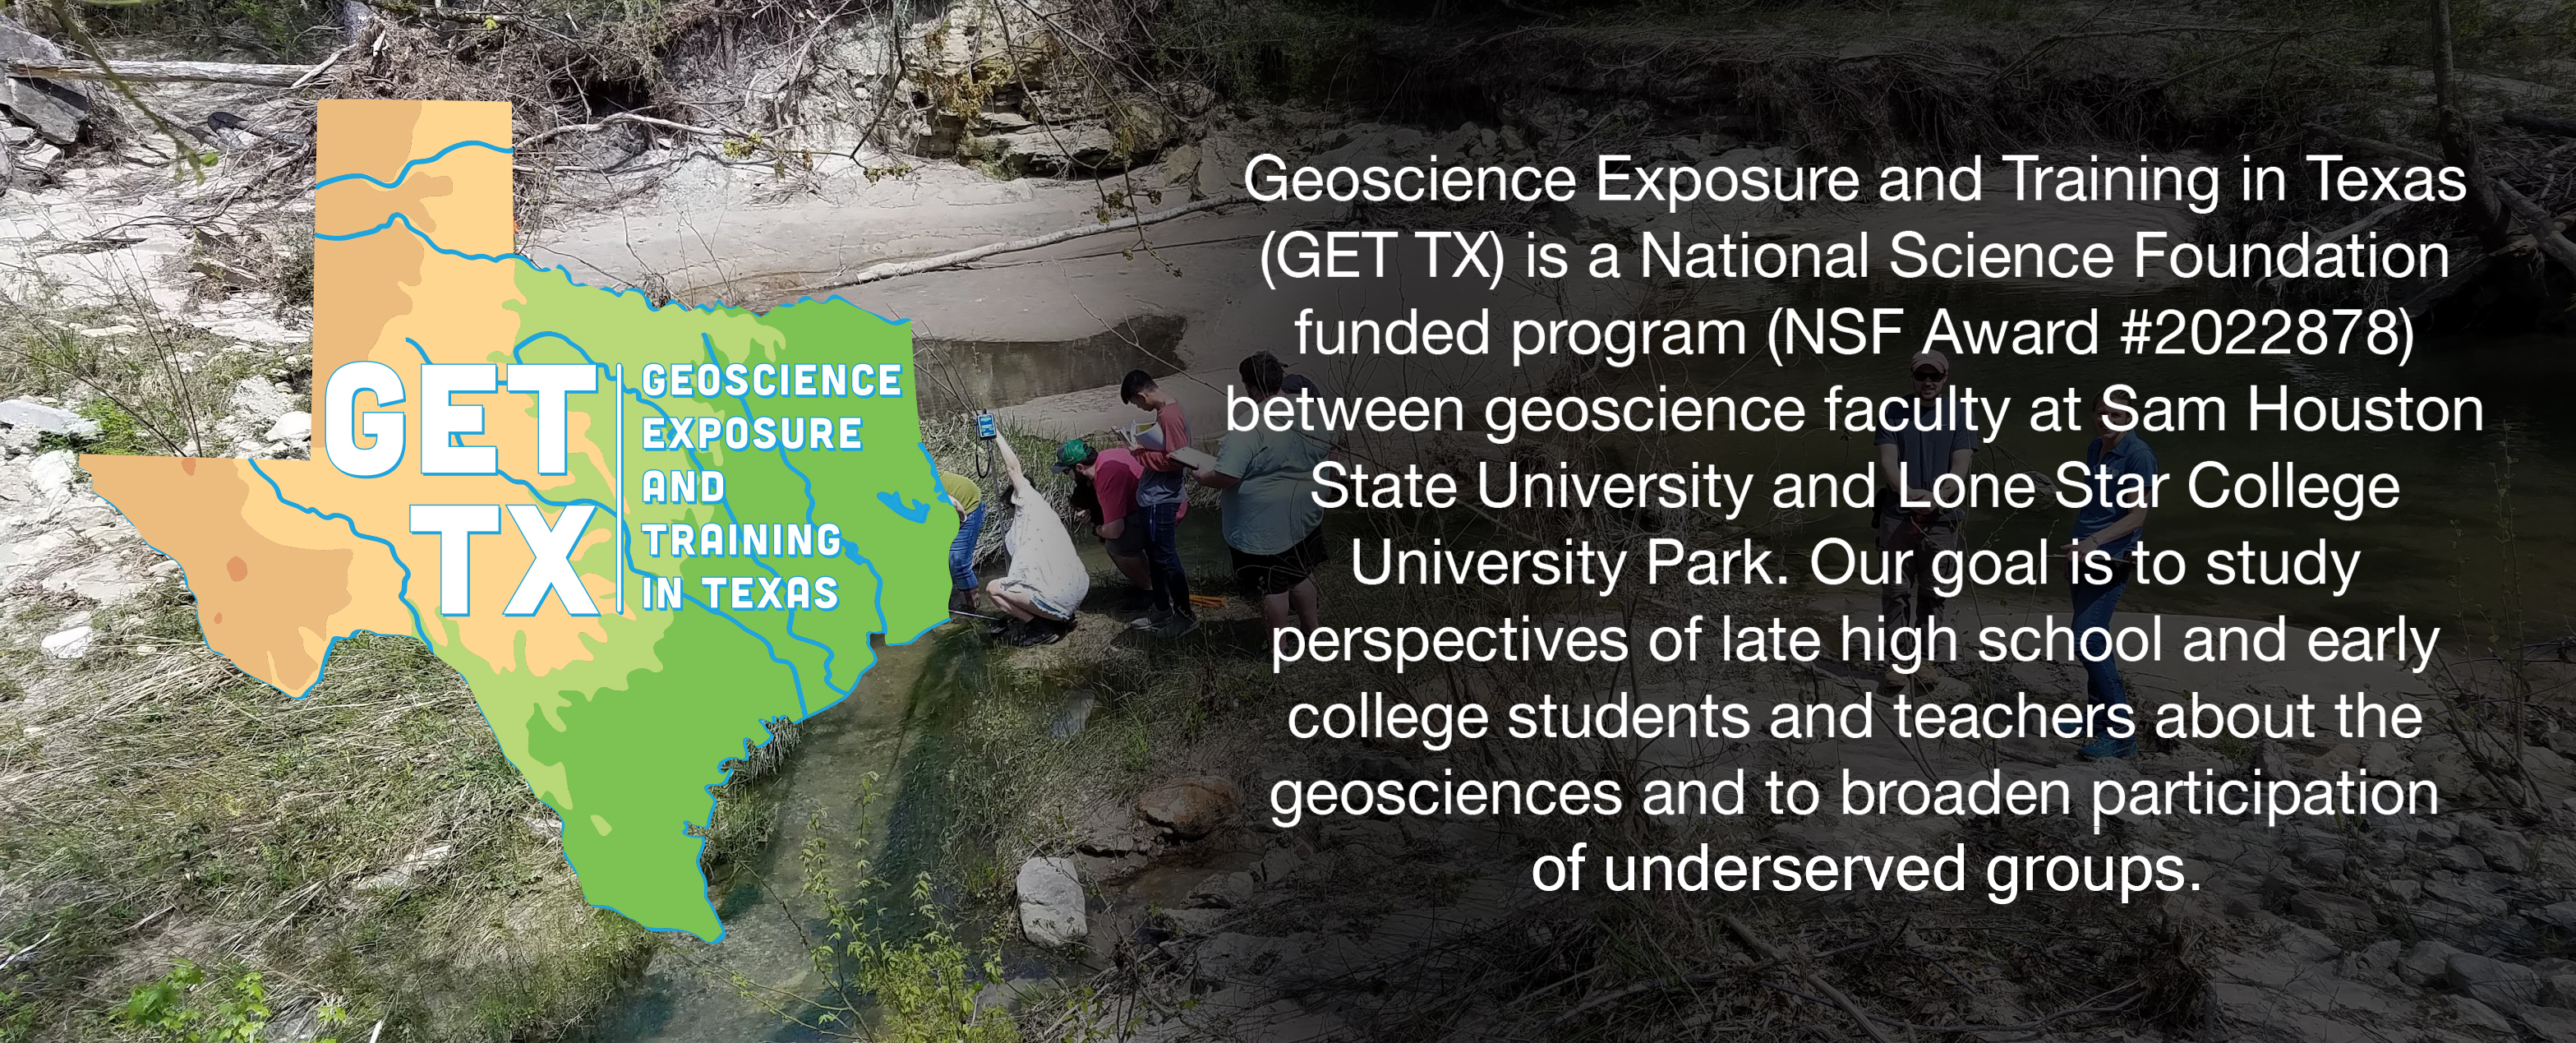 Geoscience Exposure and Training in Texas (GET TX)